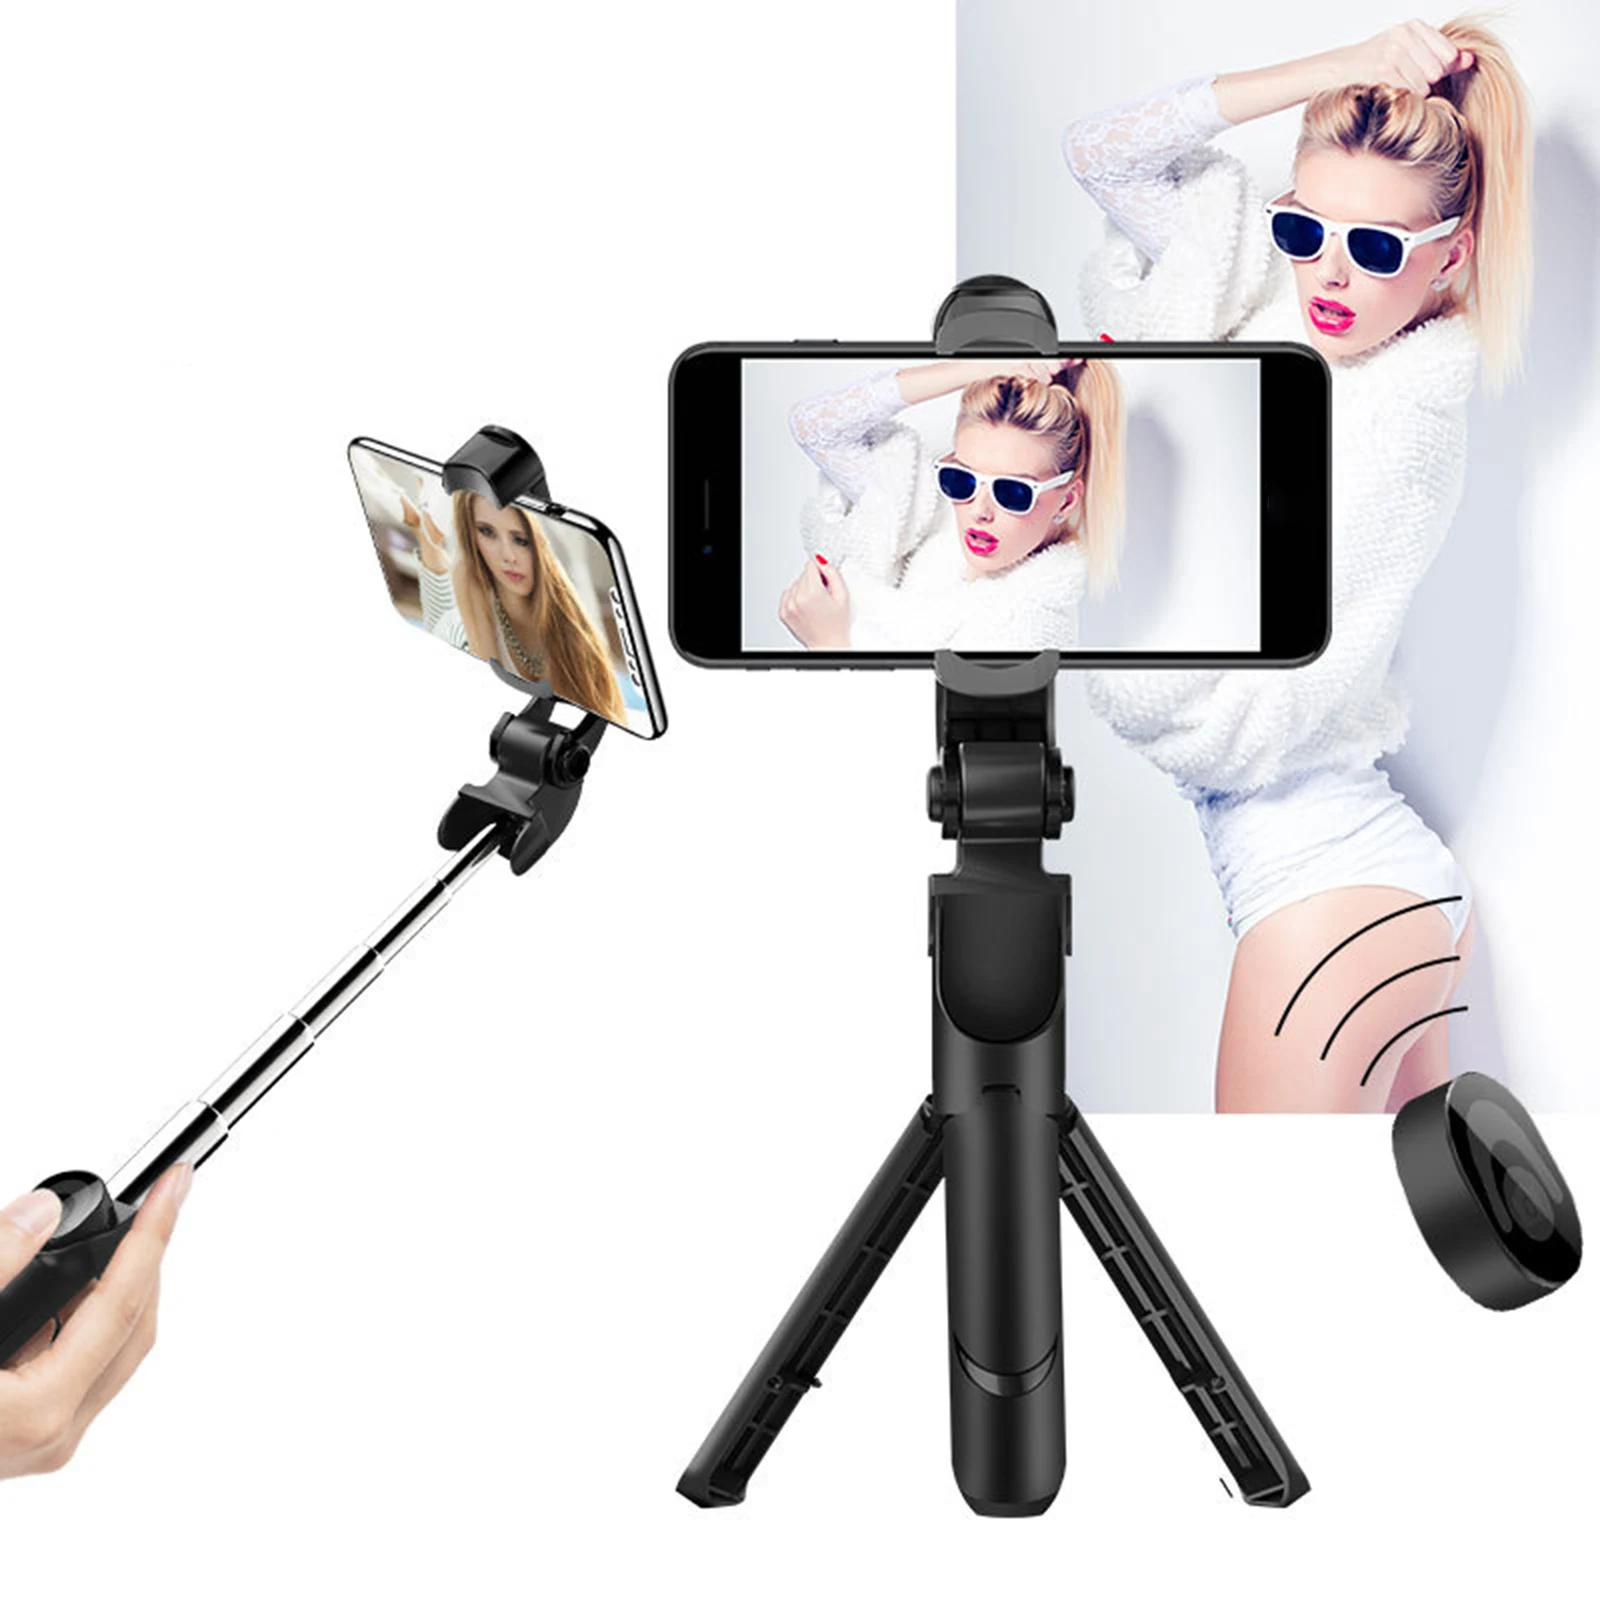 

Extendable phone tripod, Selfie stick with Bluetooth, remote 3 in 1Selfie stick for smartphone